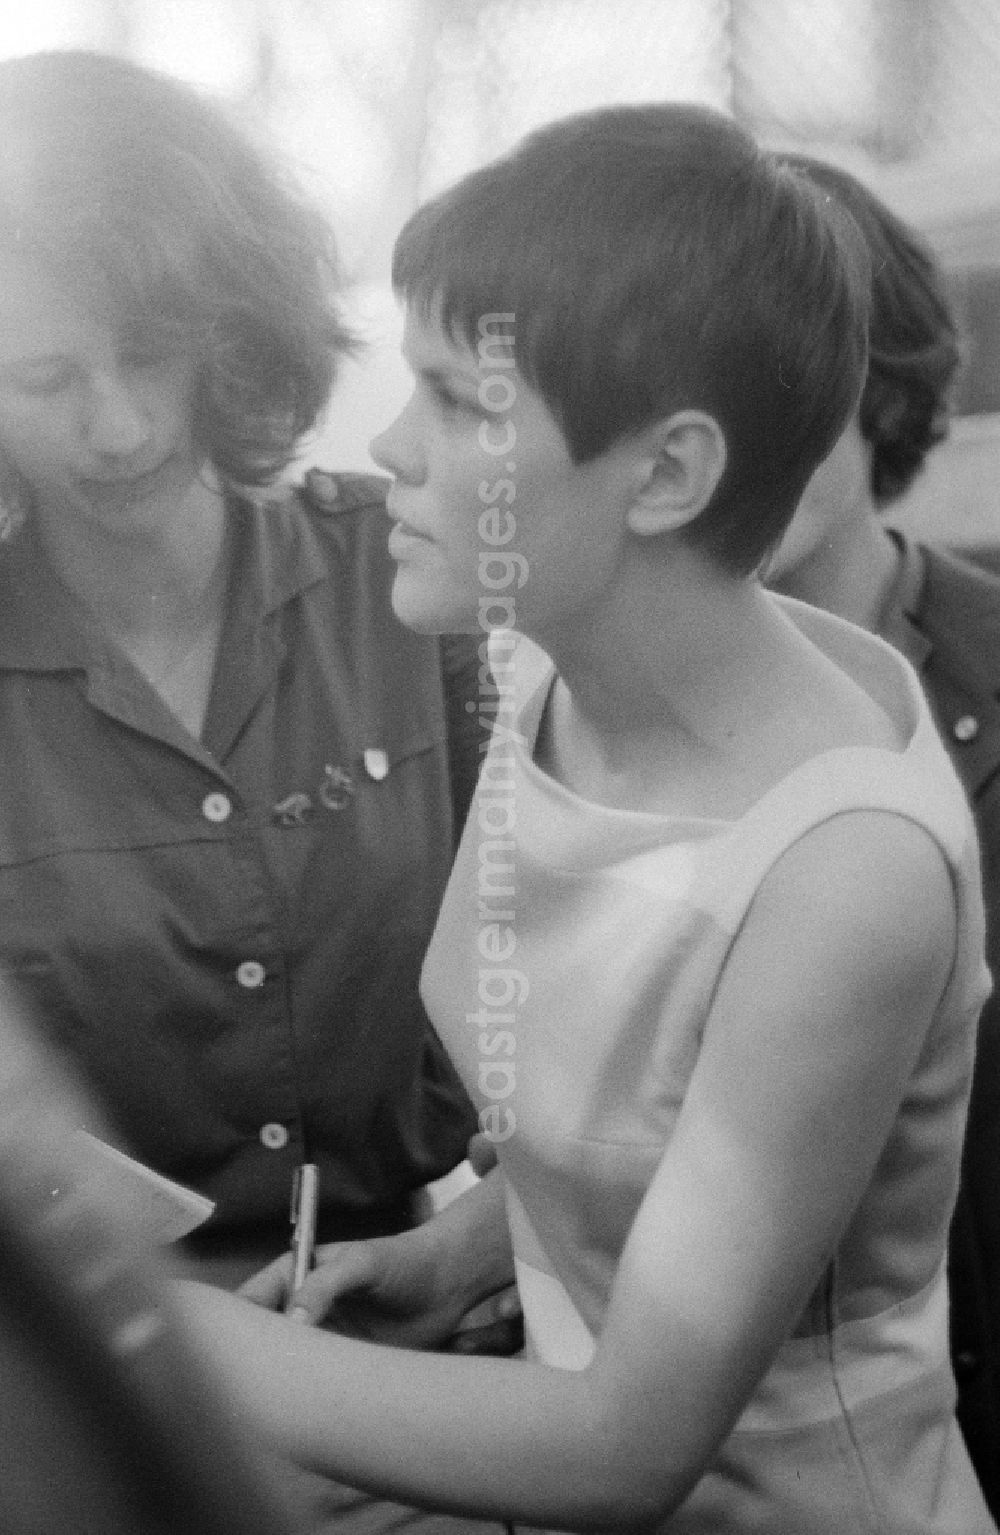 GDR photo archive: Chemnitz - The singer, actress and painter Chris Doerk in Chemnitz in Saxony on the territory of the former GDR, German Democratic Republic. Here at Pentecost meeting of the Youth 1967 in Karl-Marx-Stadt Chemnitz today